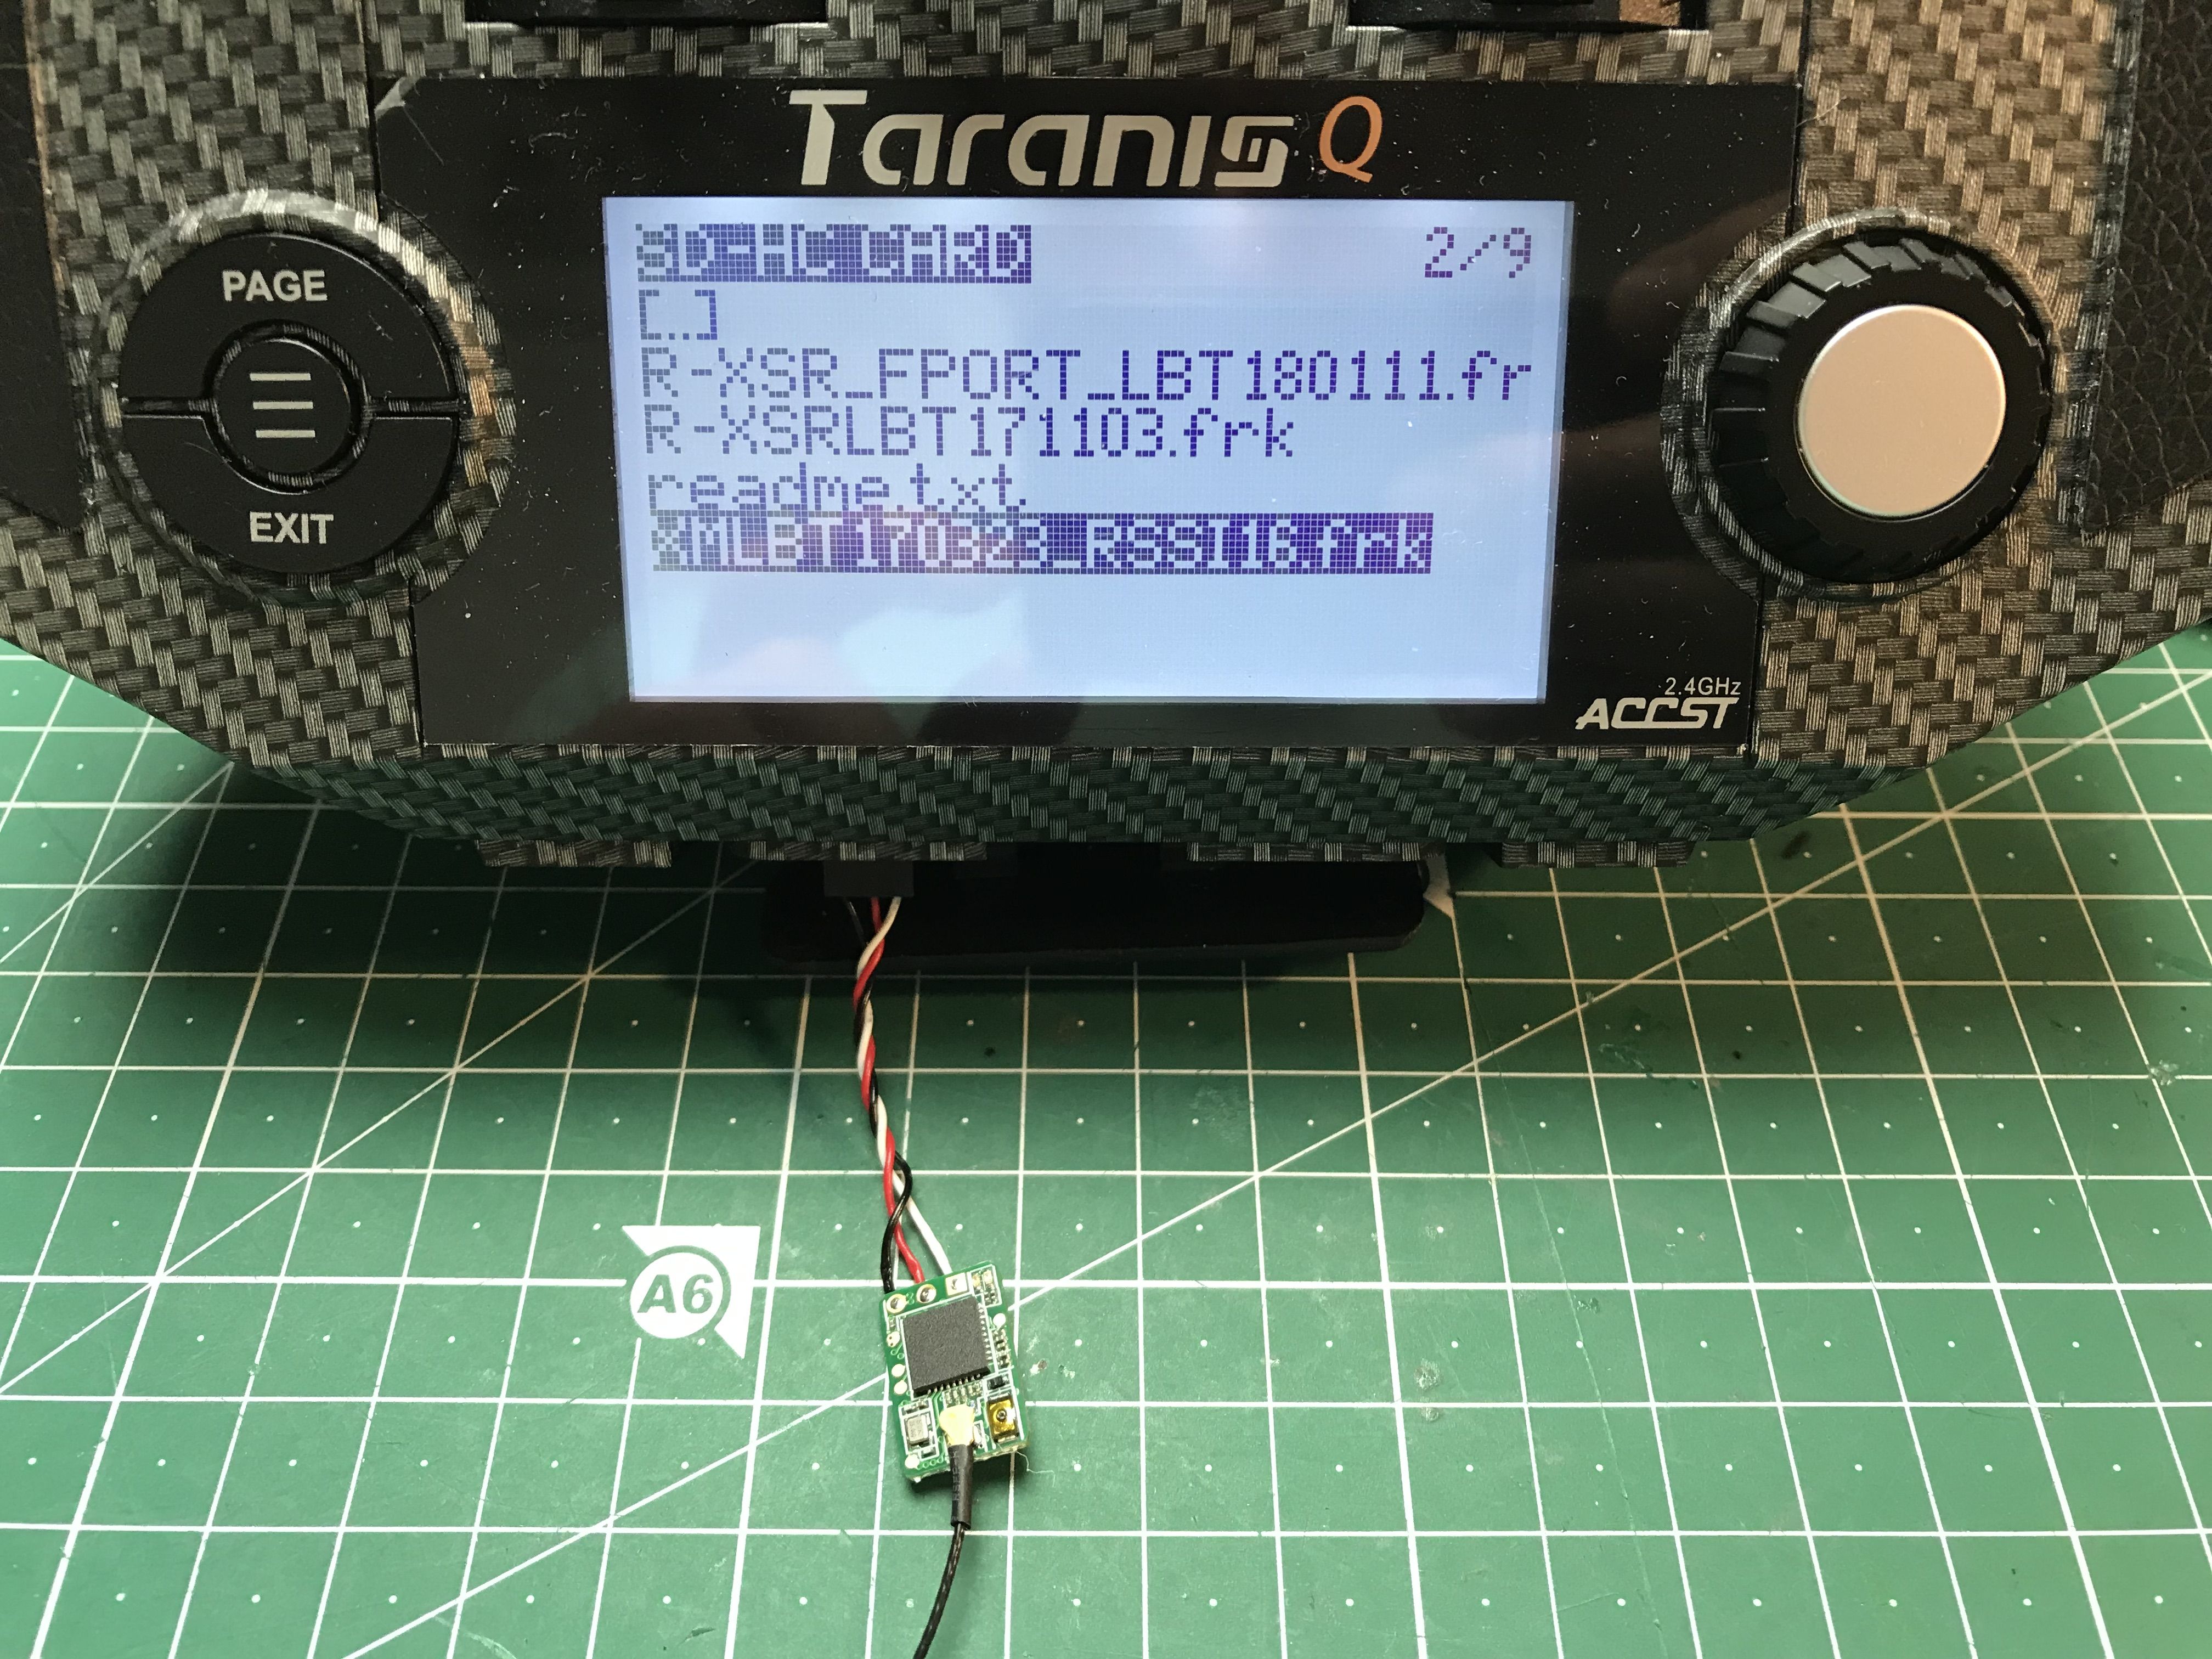 Updating the receiver firmware